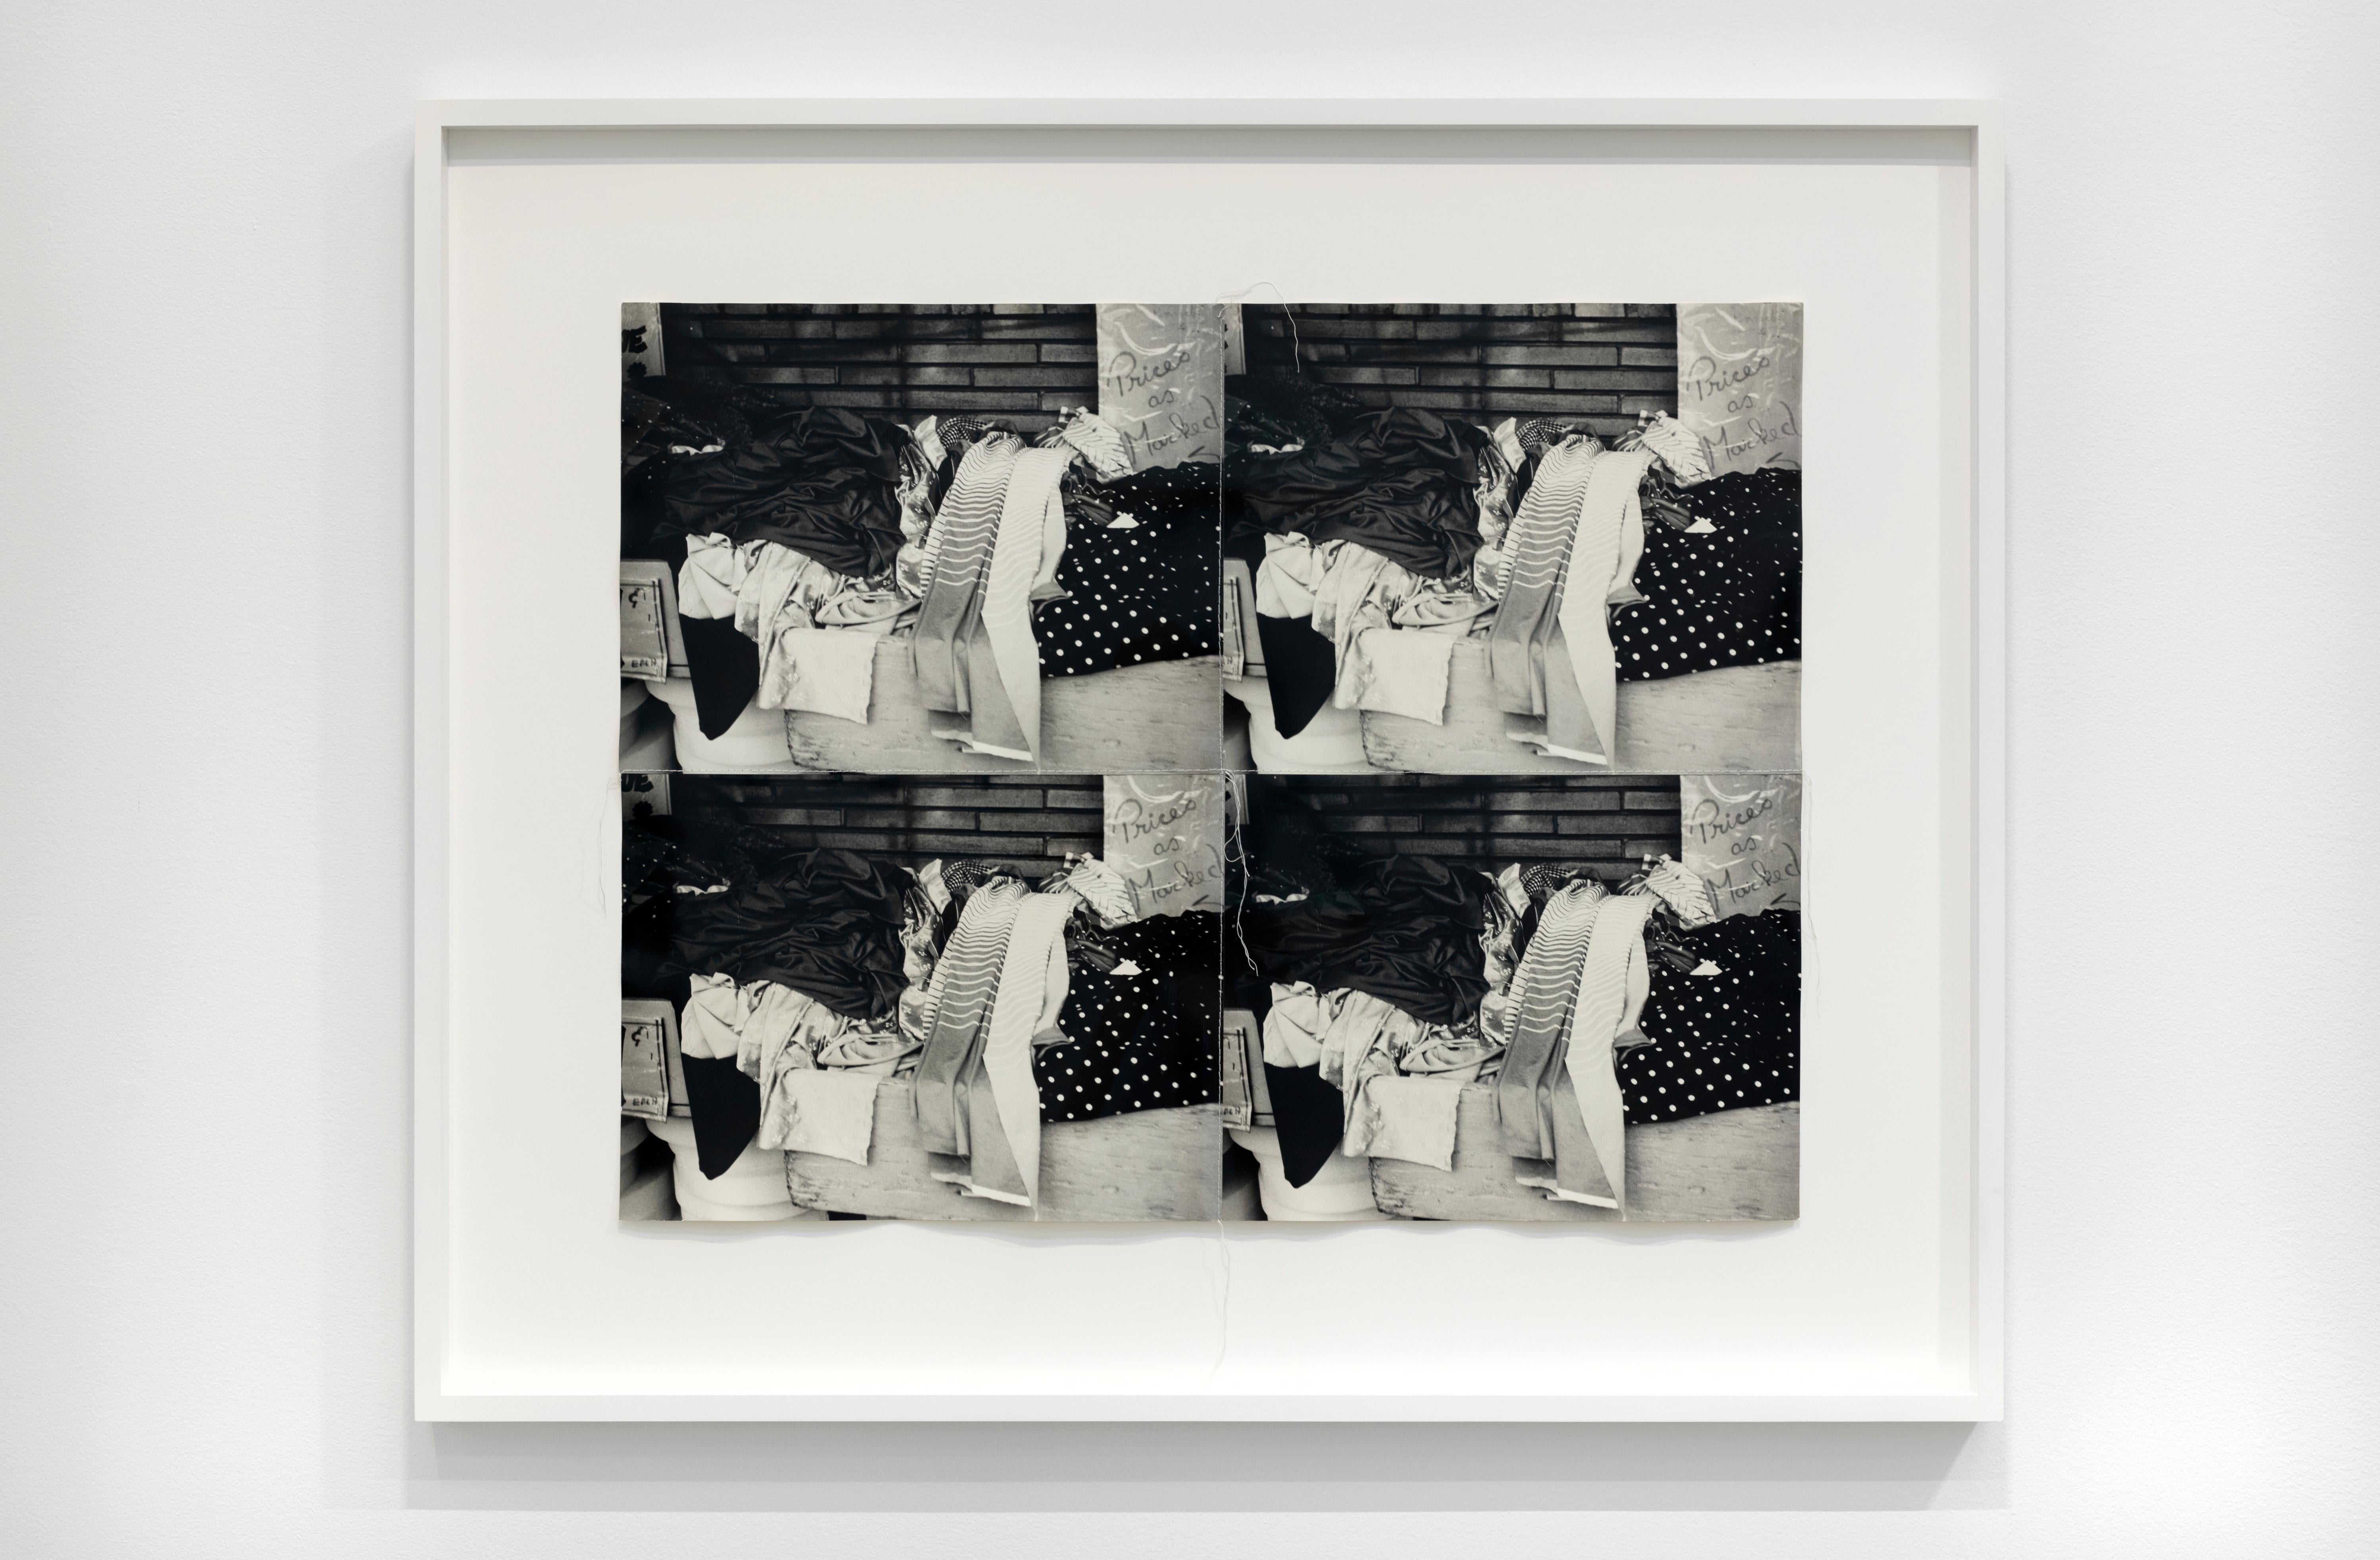 Four stitched gelatin silver prints of Prices as Marked by Andy Warhol